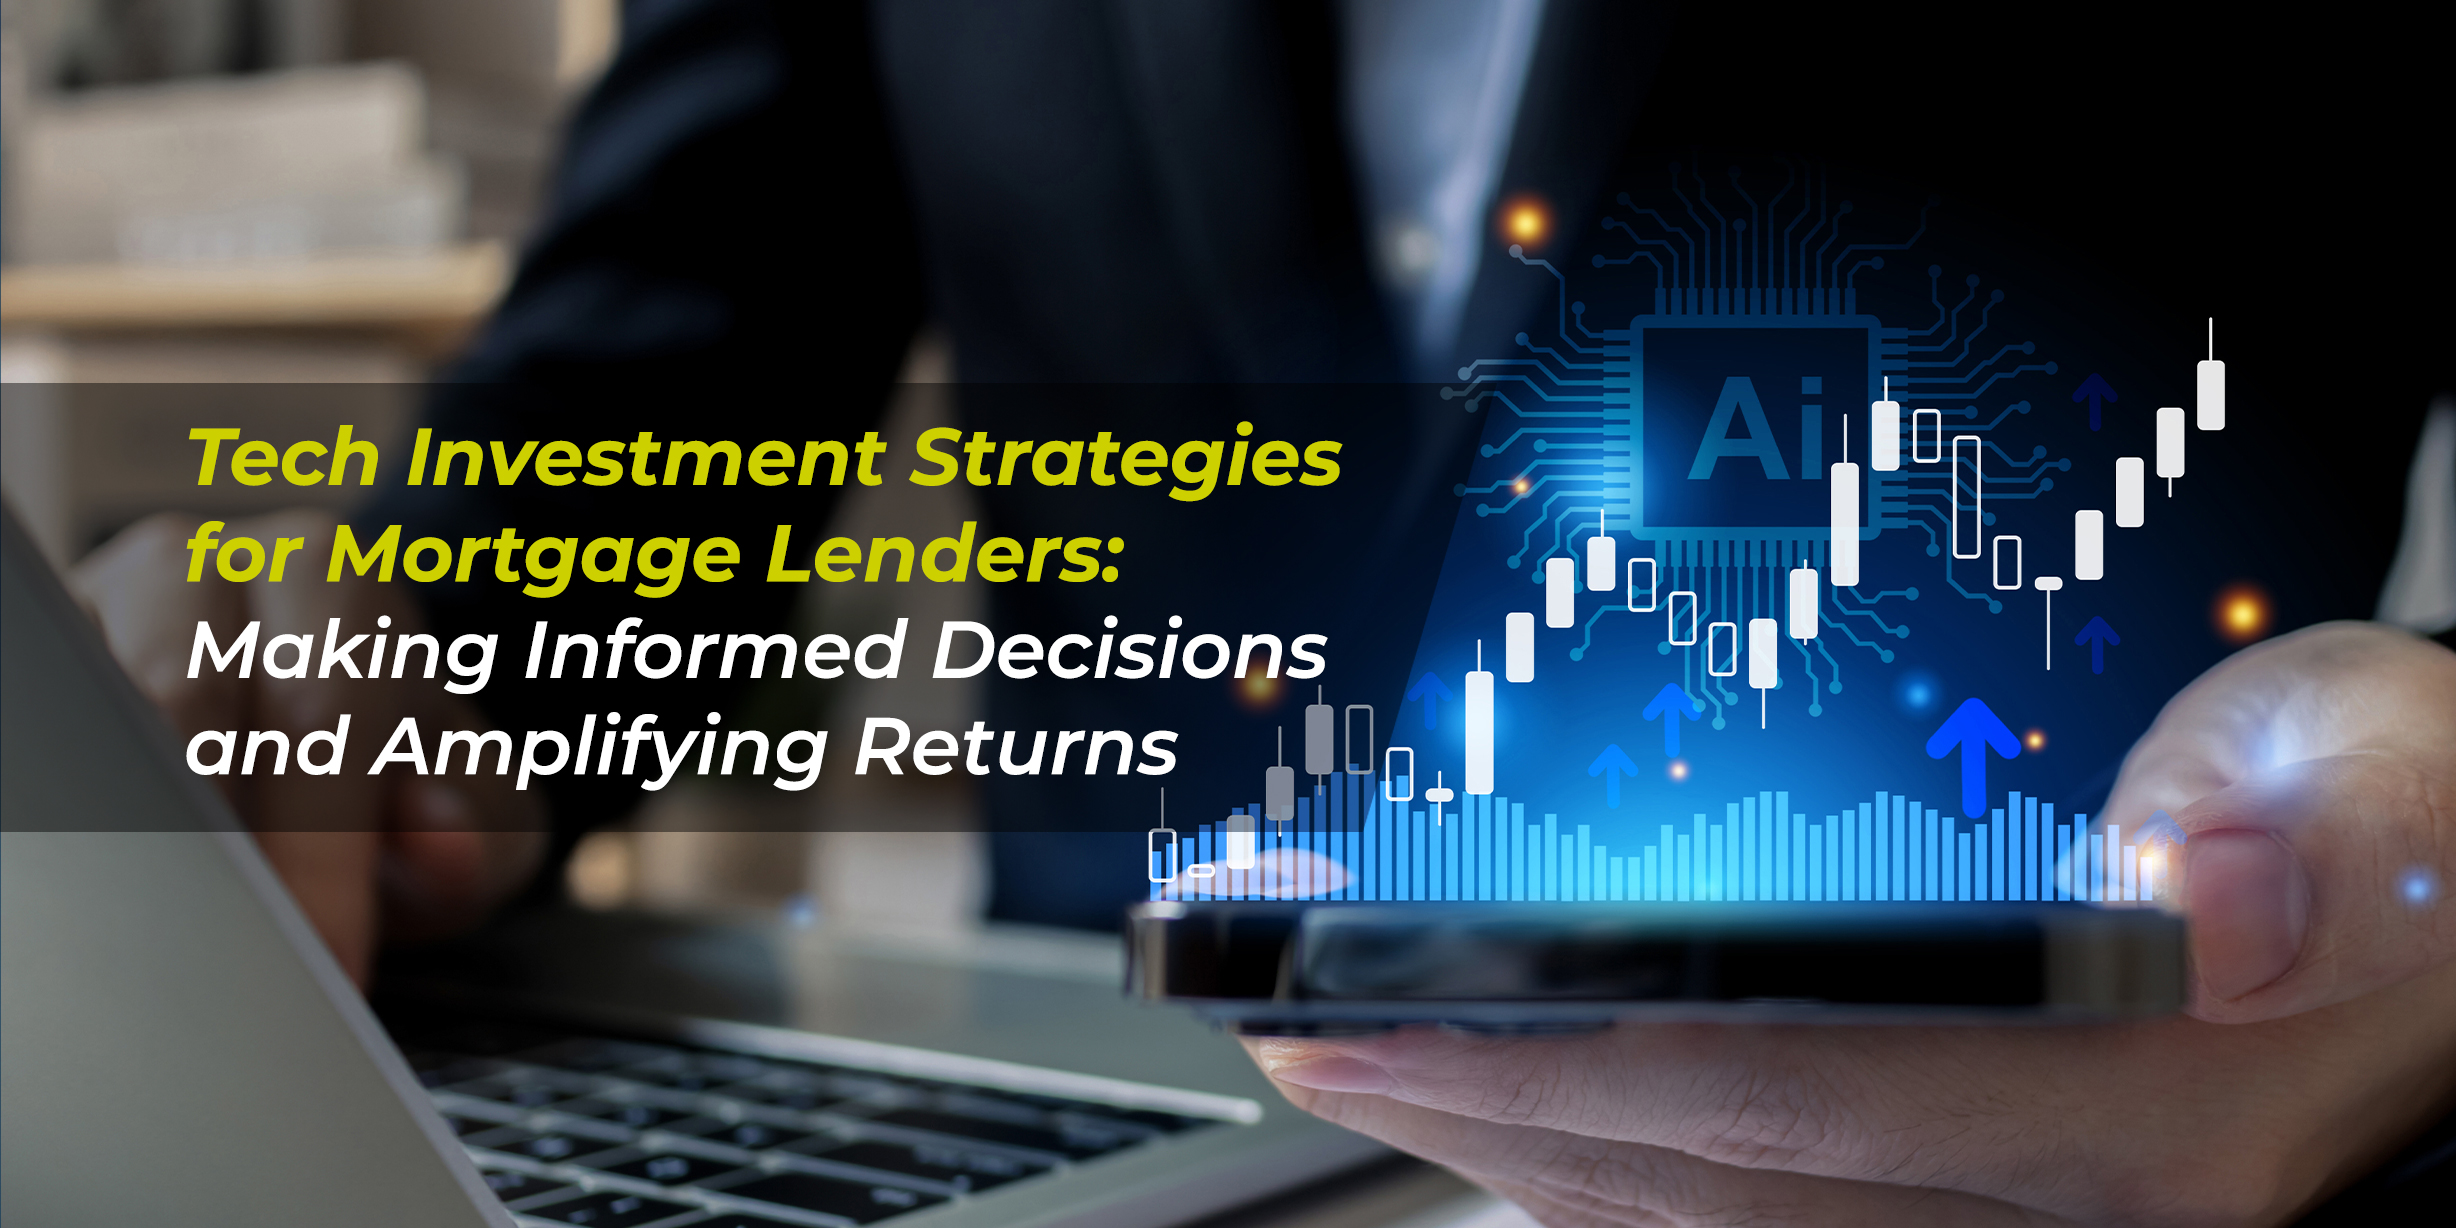 Tech Investment Strategies for Mortgage Lenders: Making Informed Decisions and Amplifying Returns